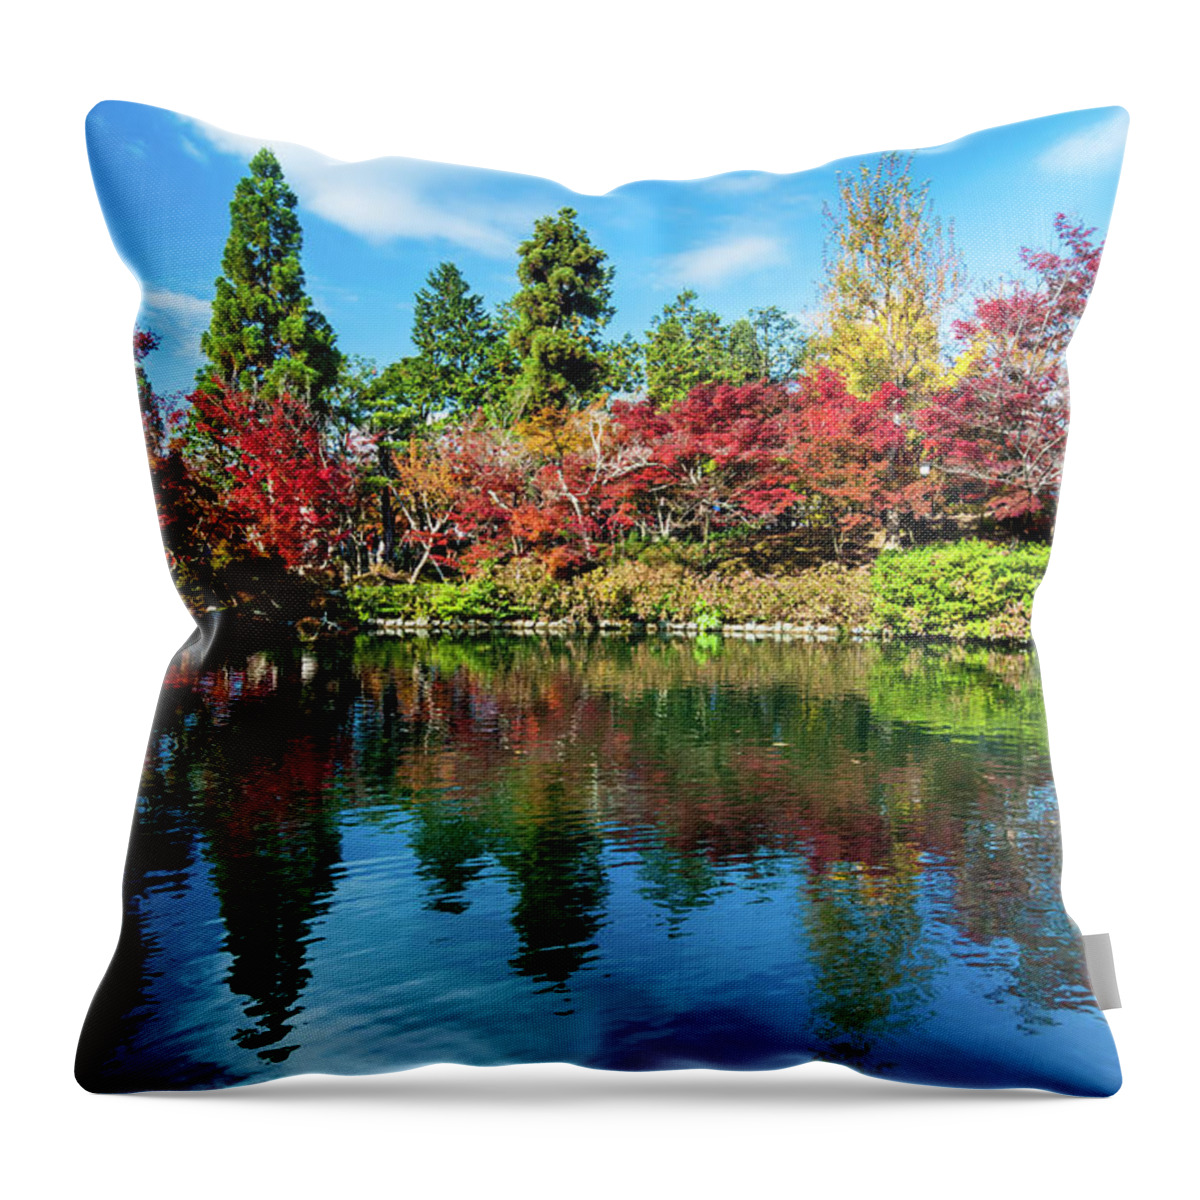 Scenics Throw Pillow featuring the photograph Maple Tree By The Lake by Wan Ru Chen